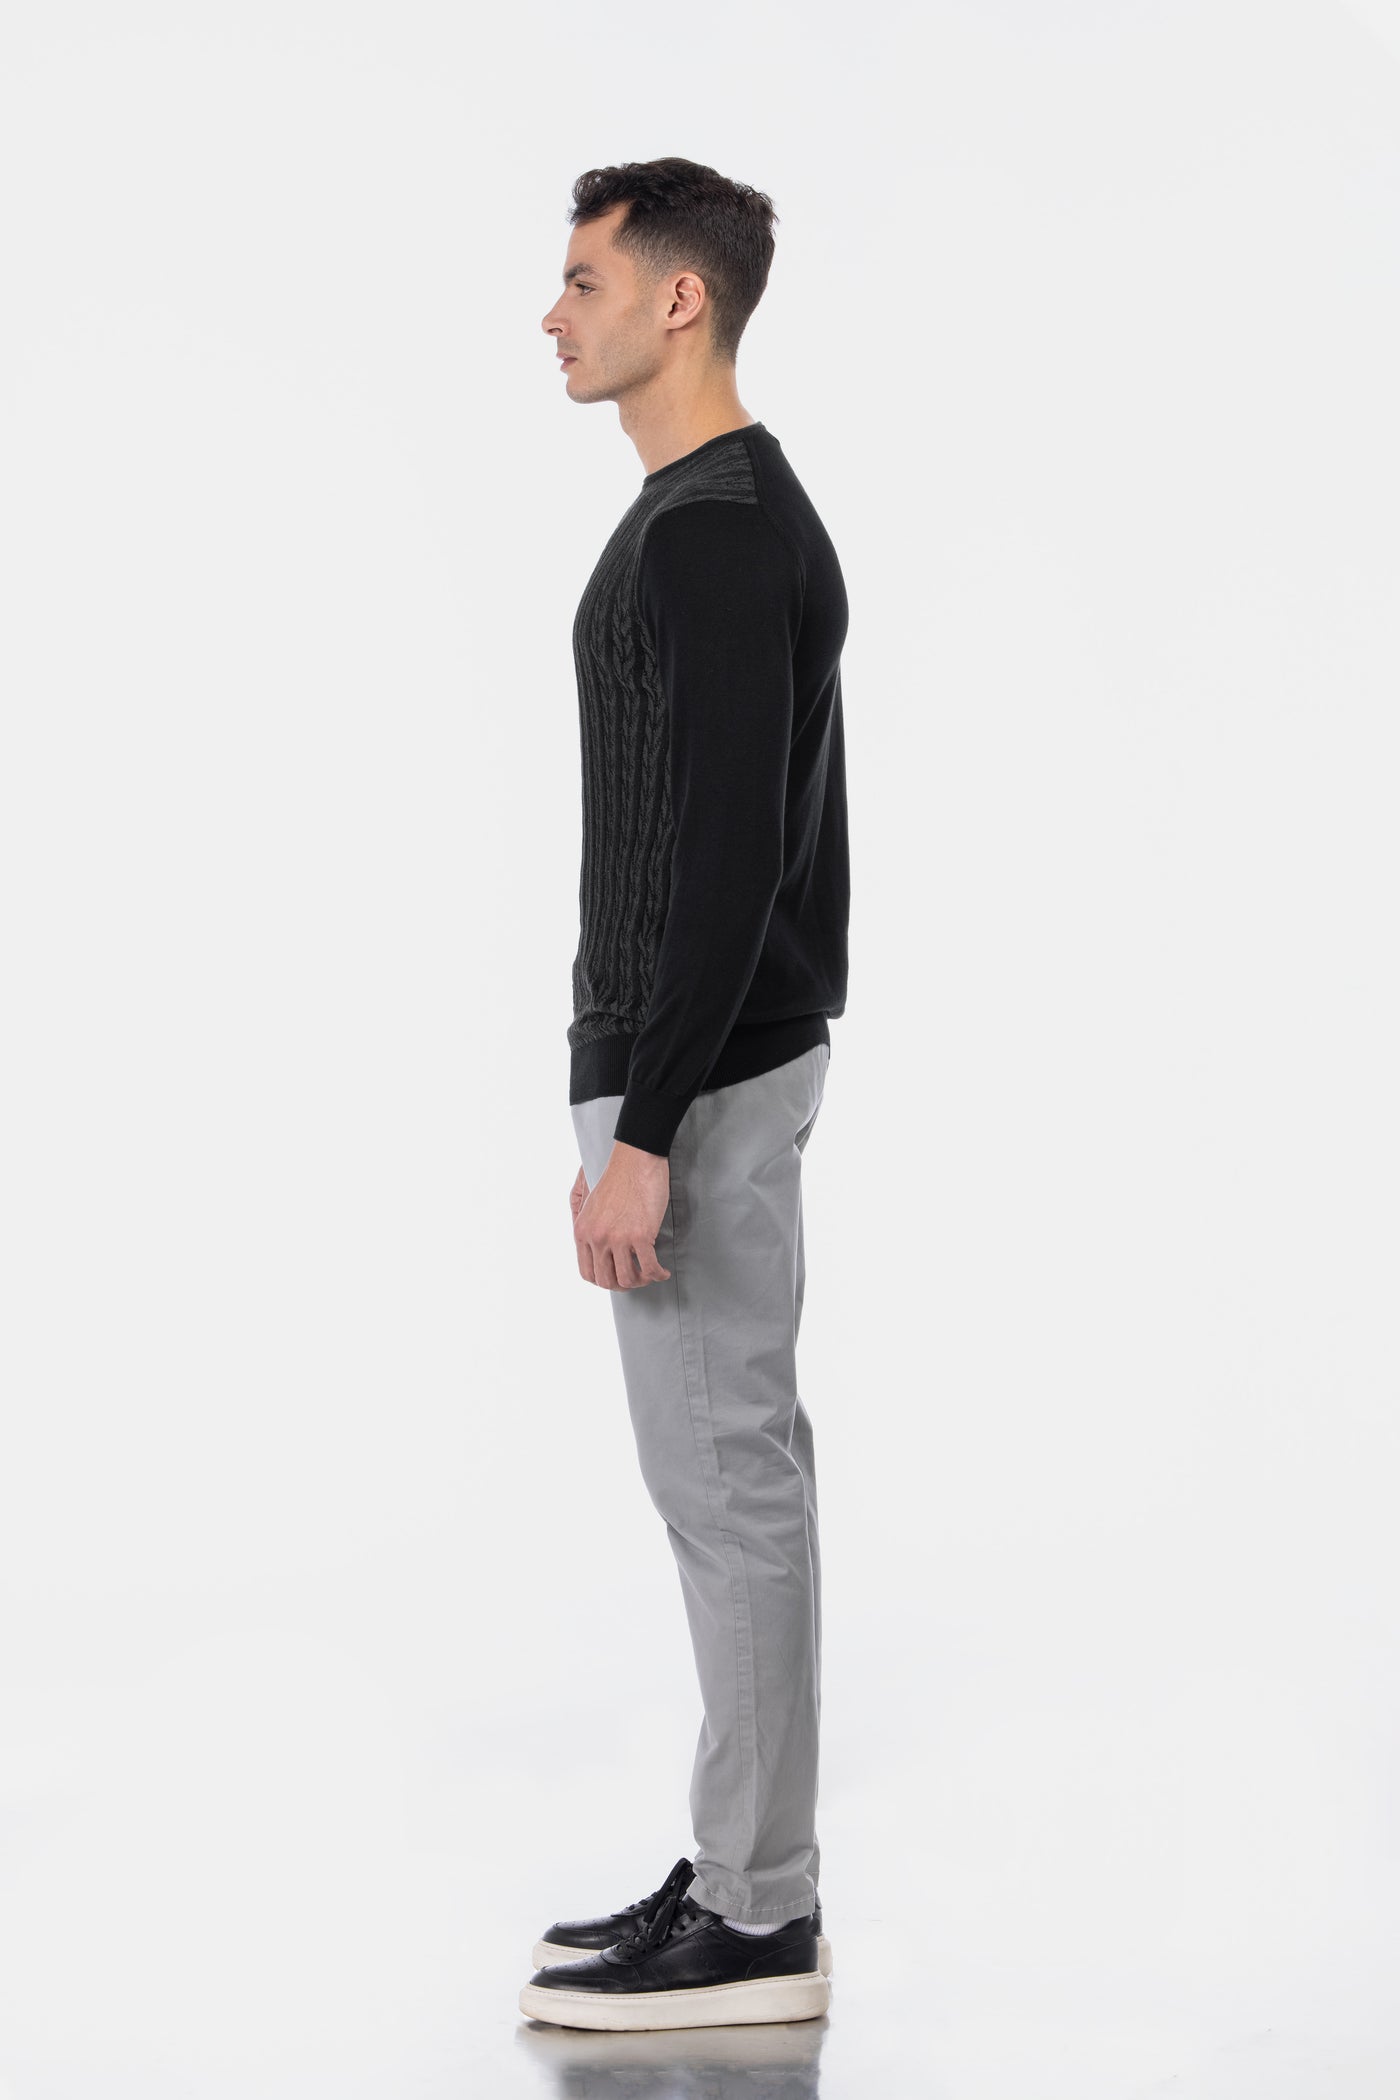 Jacquard Round Neck Black and Silver Knitted Pullover